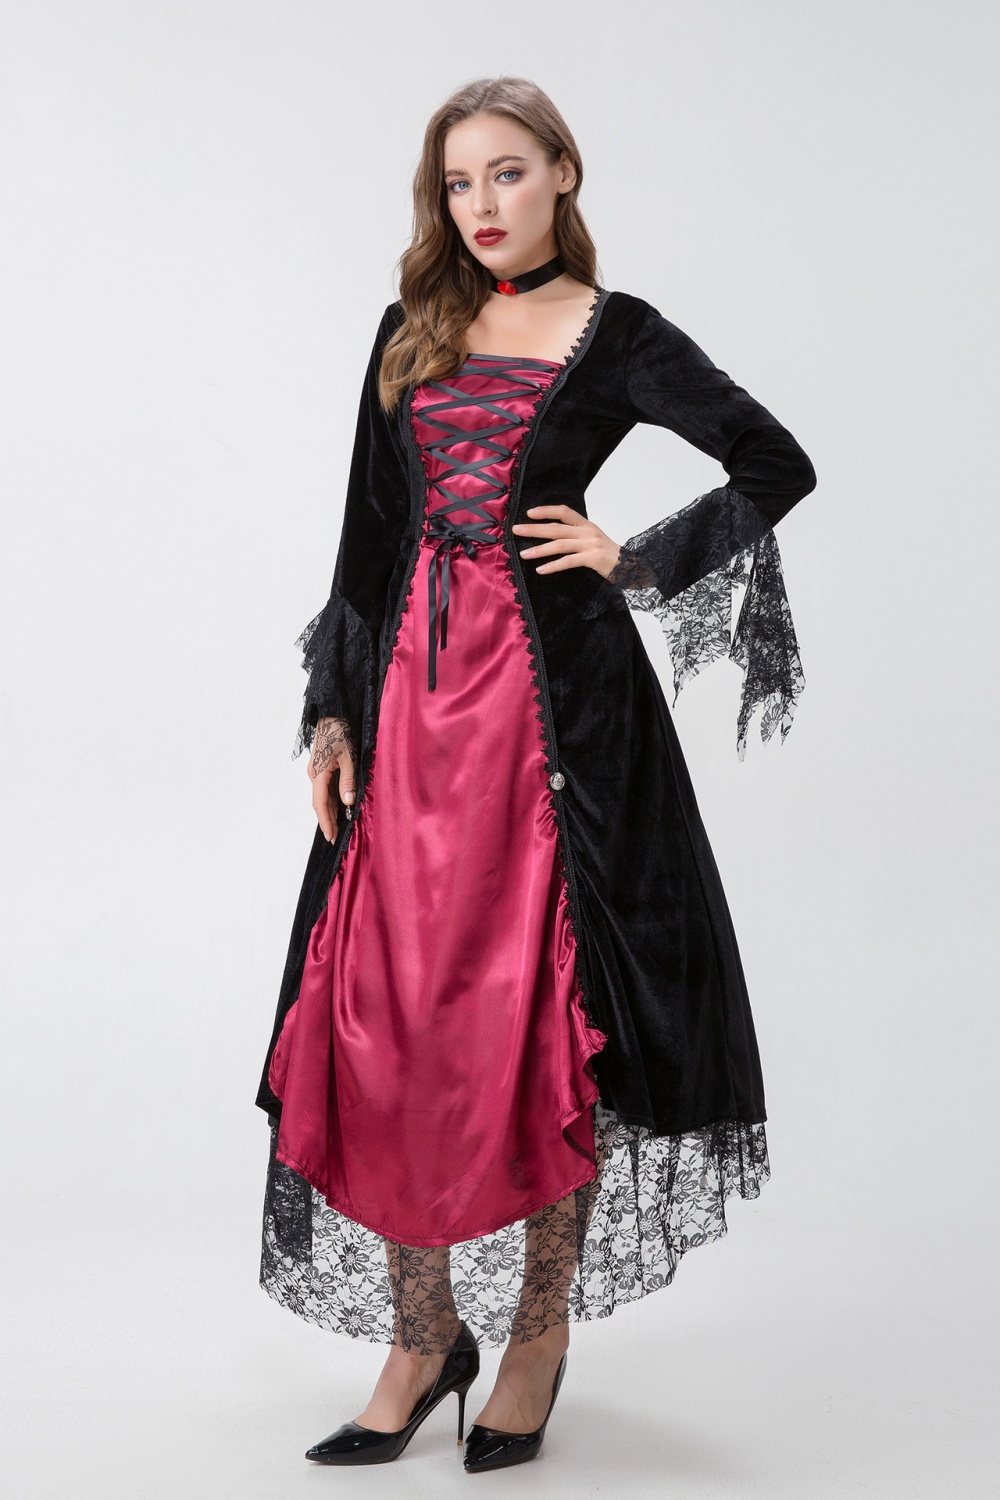 Halloween vampire role-play queen witch devil adult dress